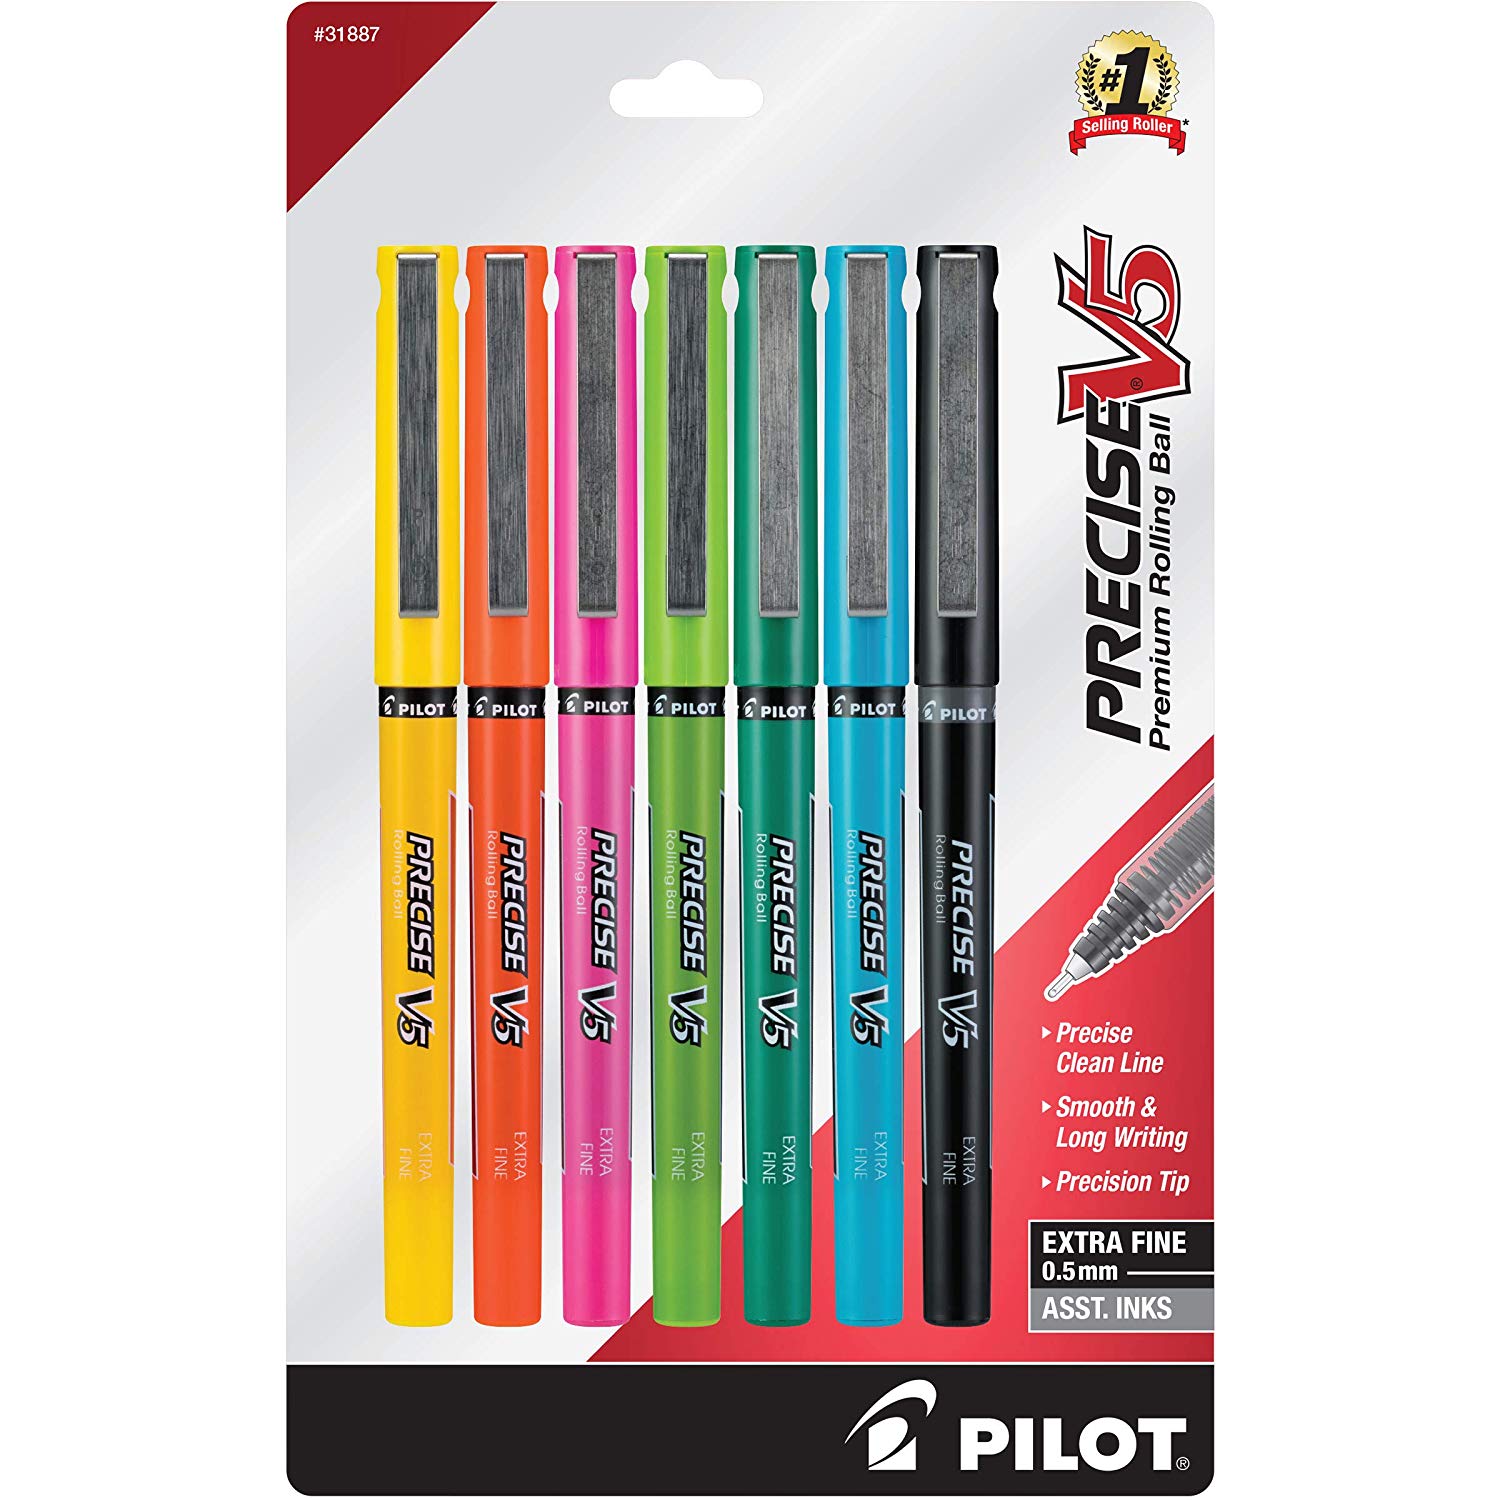 Pilot 31887 Precise V5 Rolling Ball Stick Pens with Liquid Ink, Extra Fine Point, 7-Pack, Assorted Colors